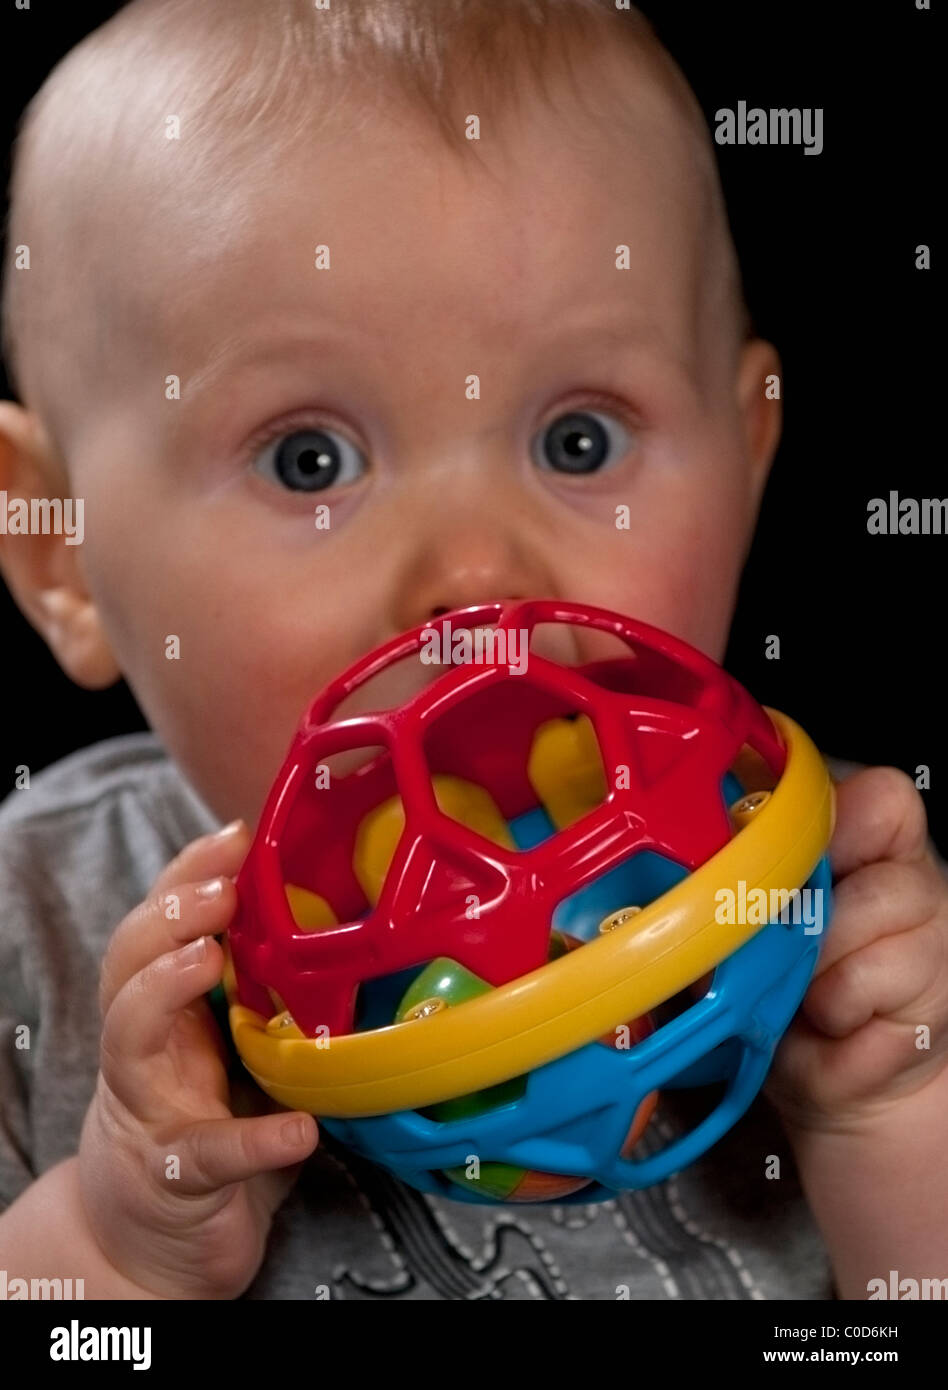 Baby boy 8 months old with big eyes and a new toy Stock Photo